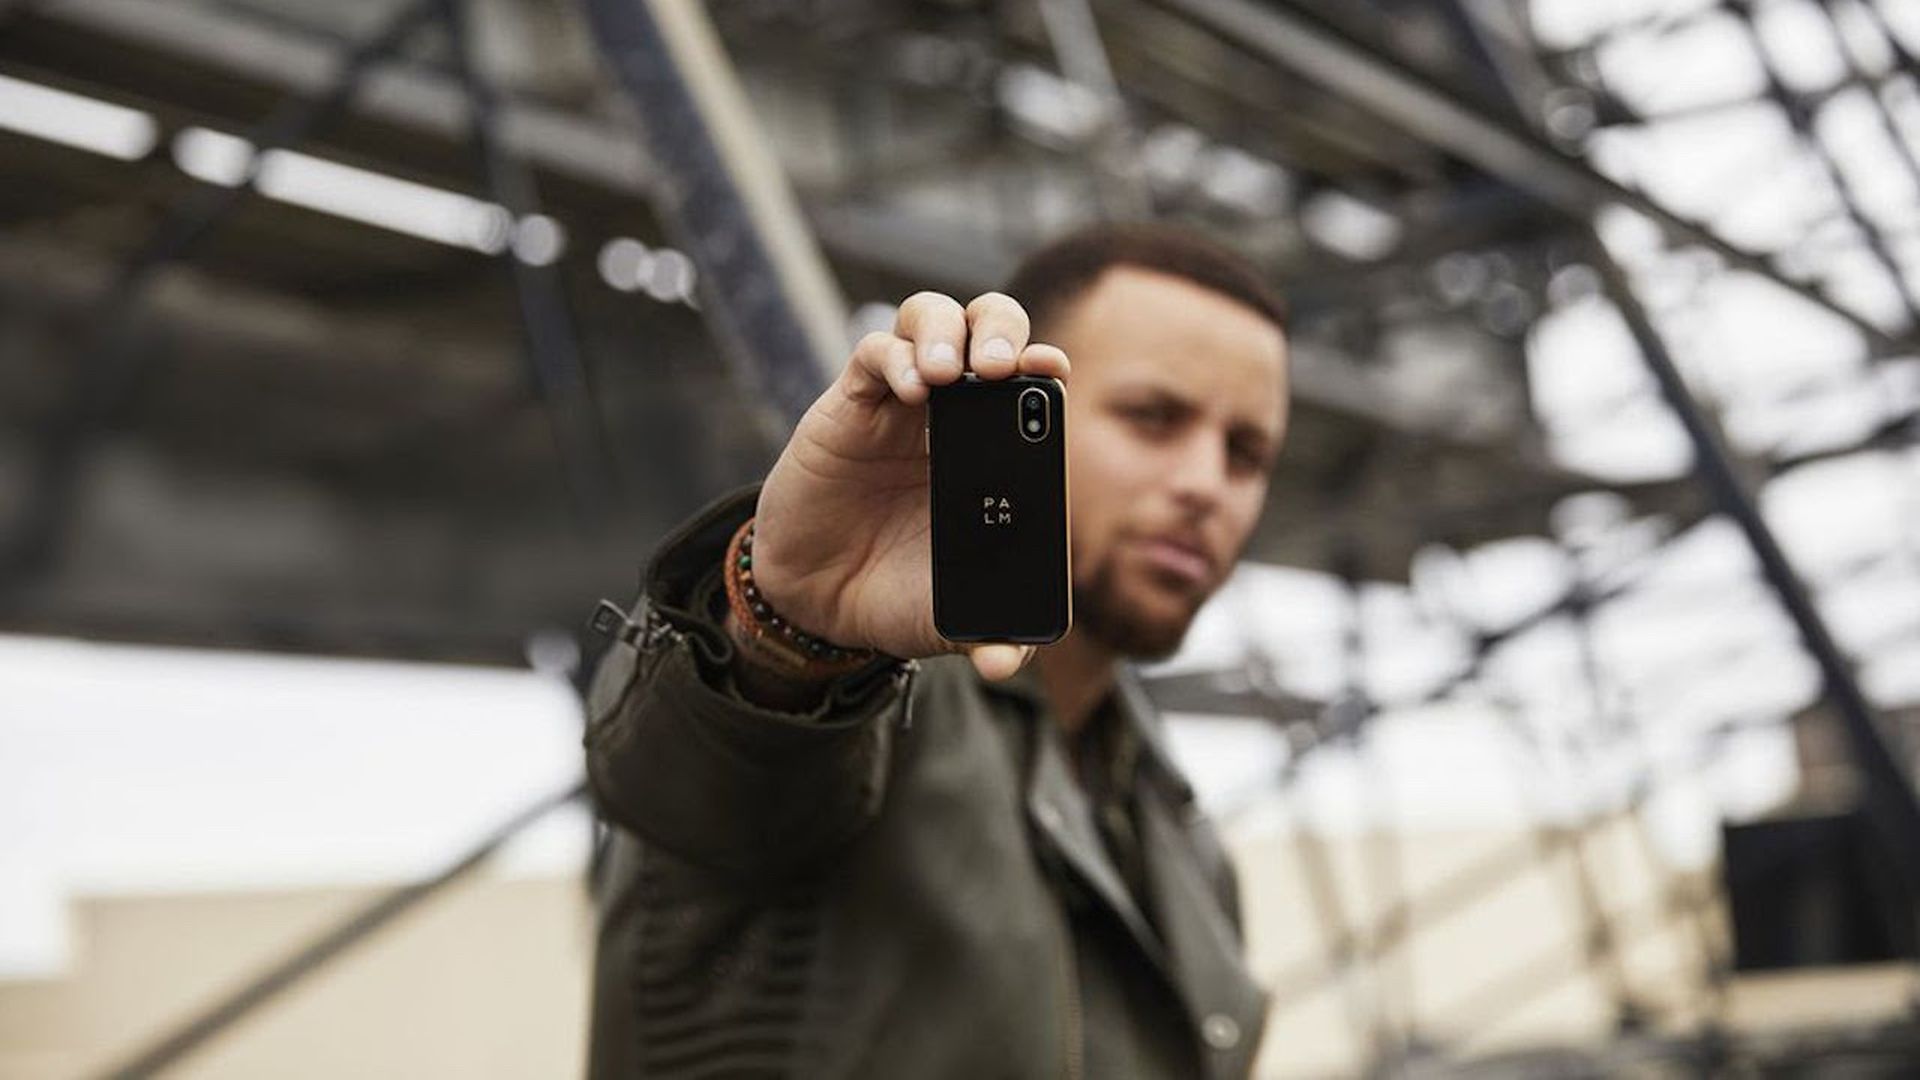 Steph Curry holding up a Palm phone.